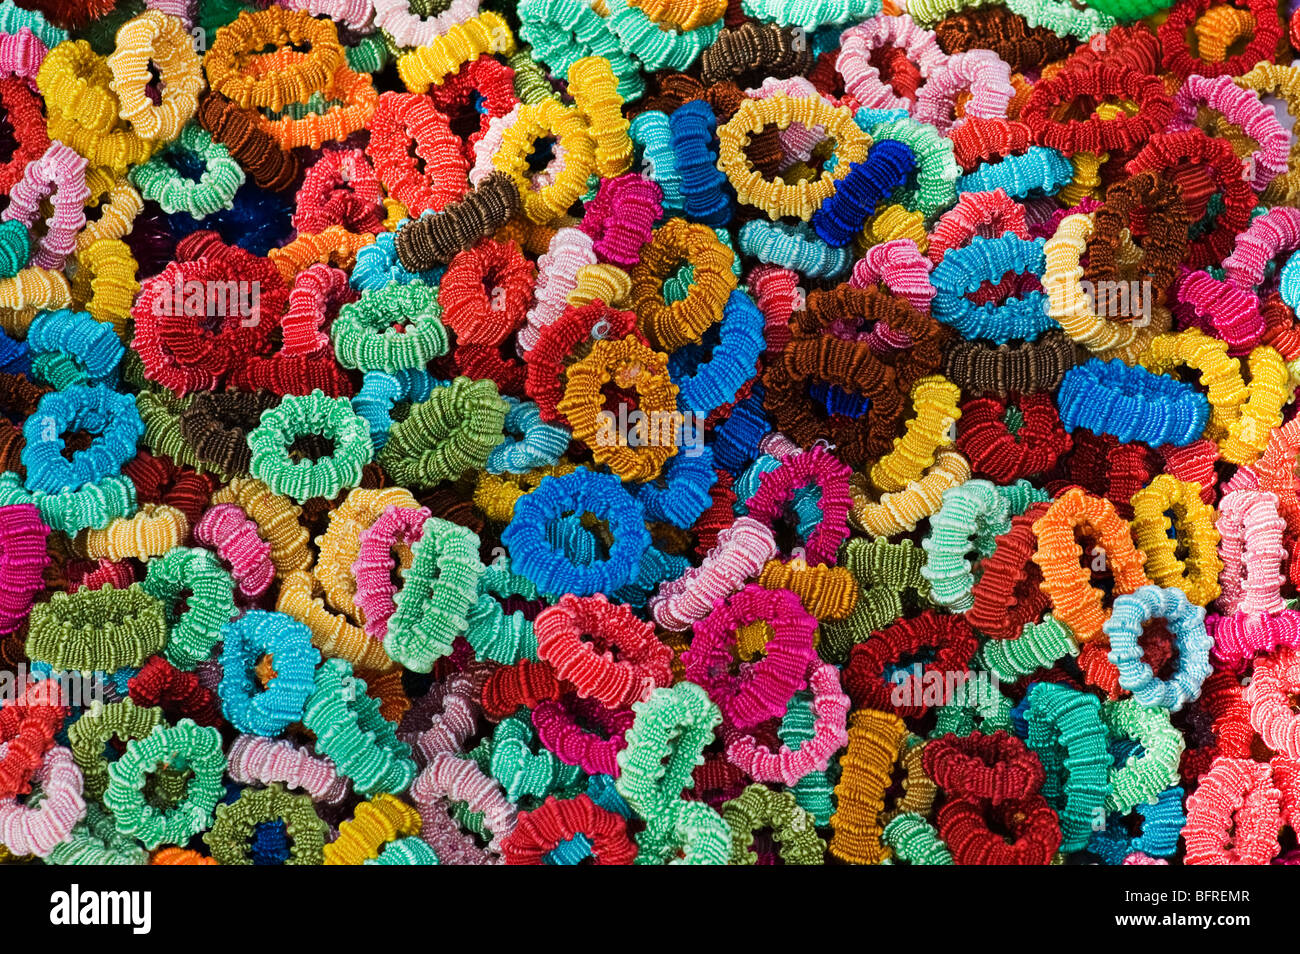 Scrunchies, Hair ties, colourful pattern on a market stall in India Stock Photo